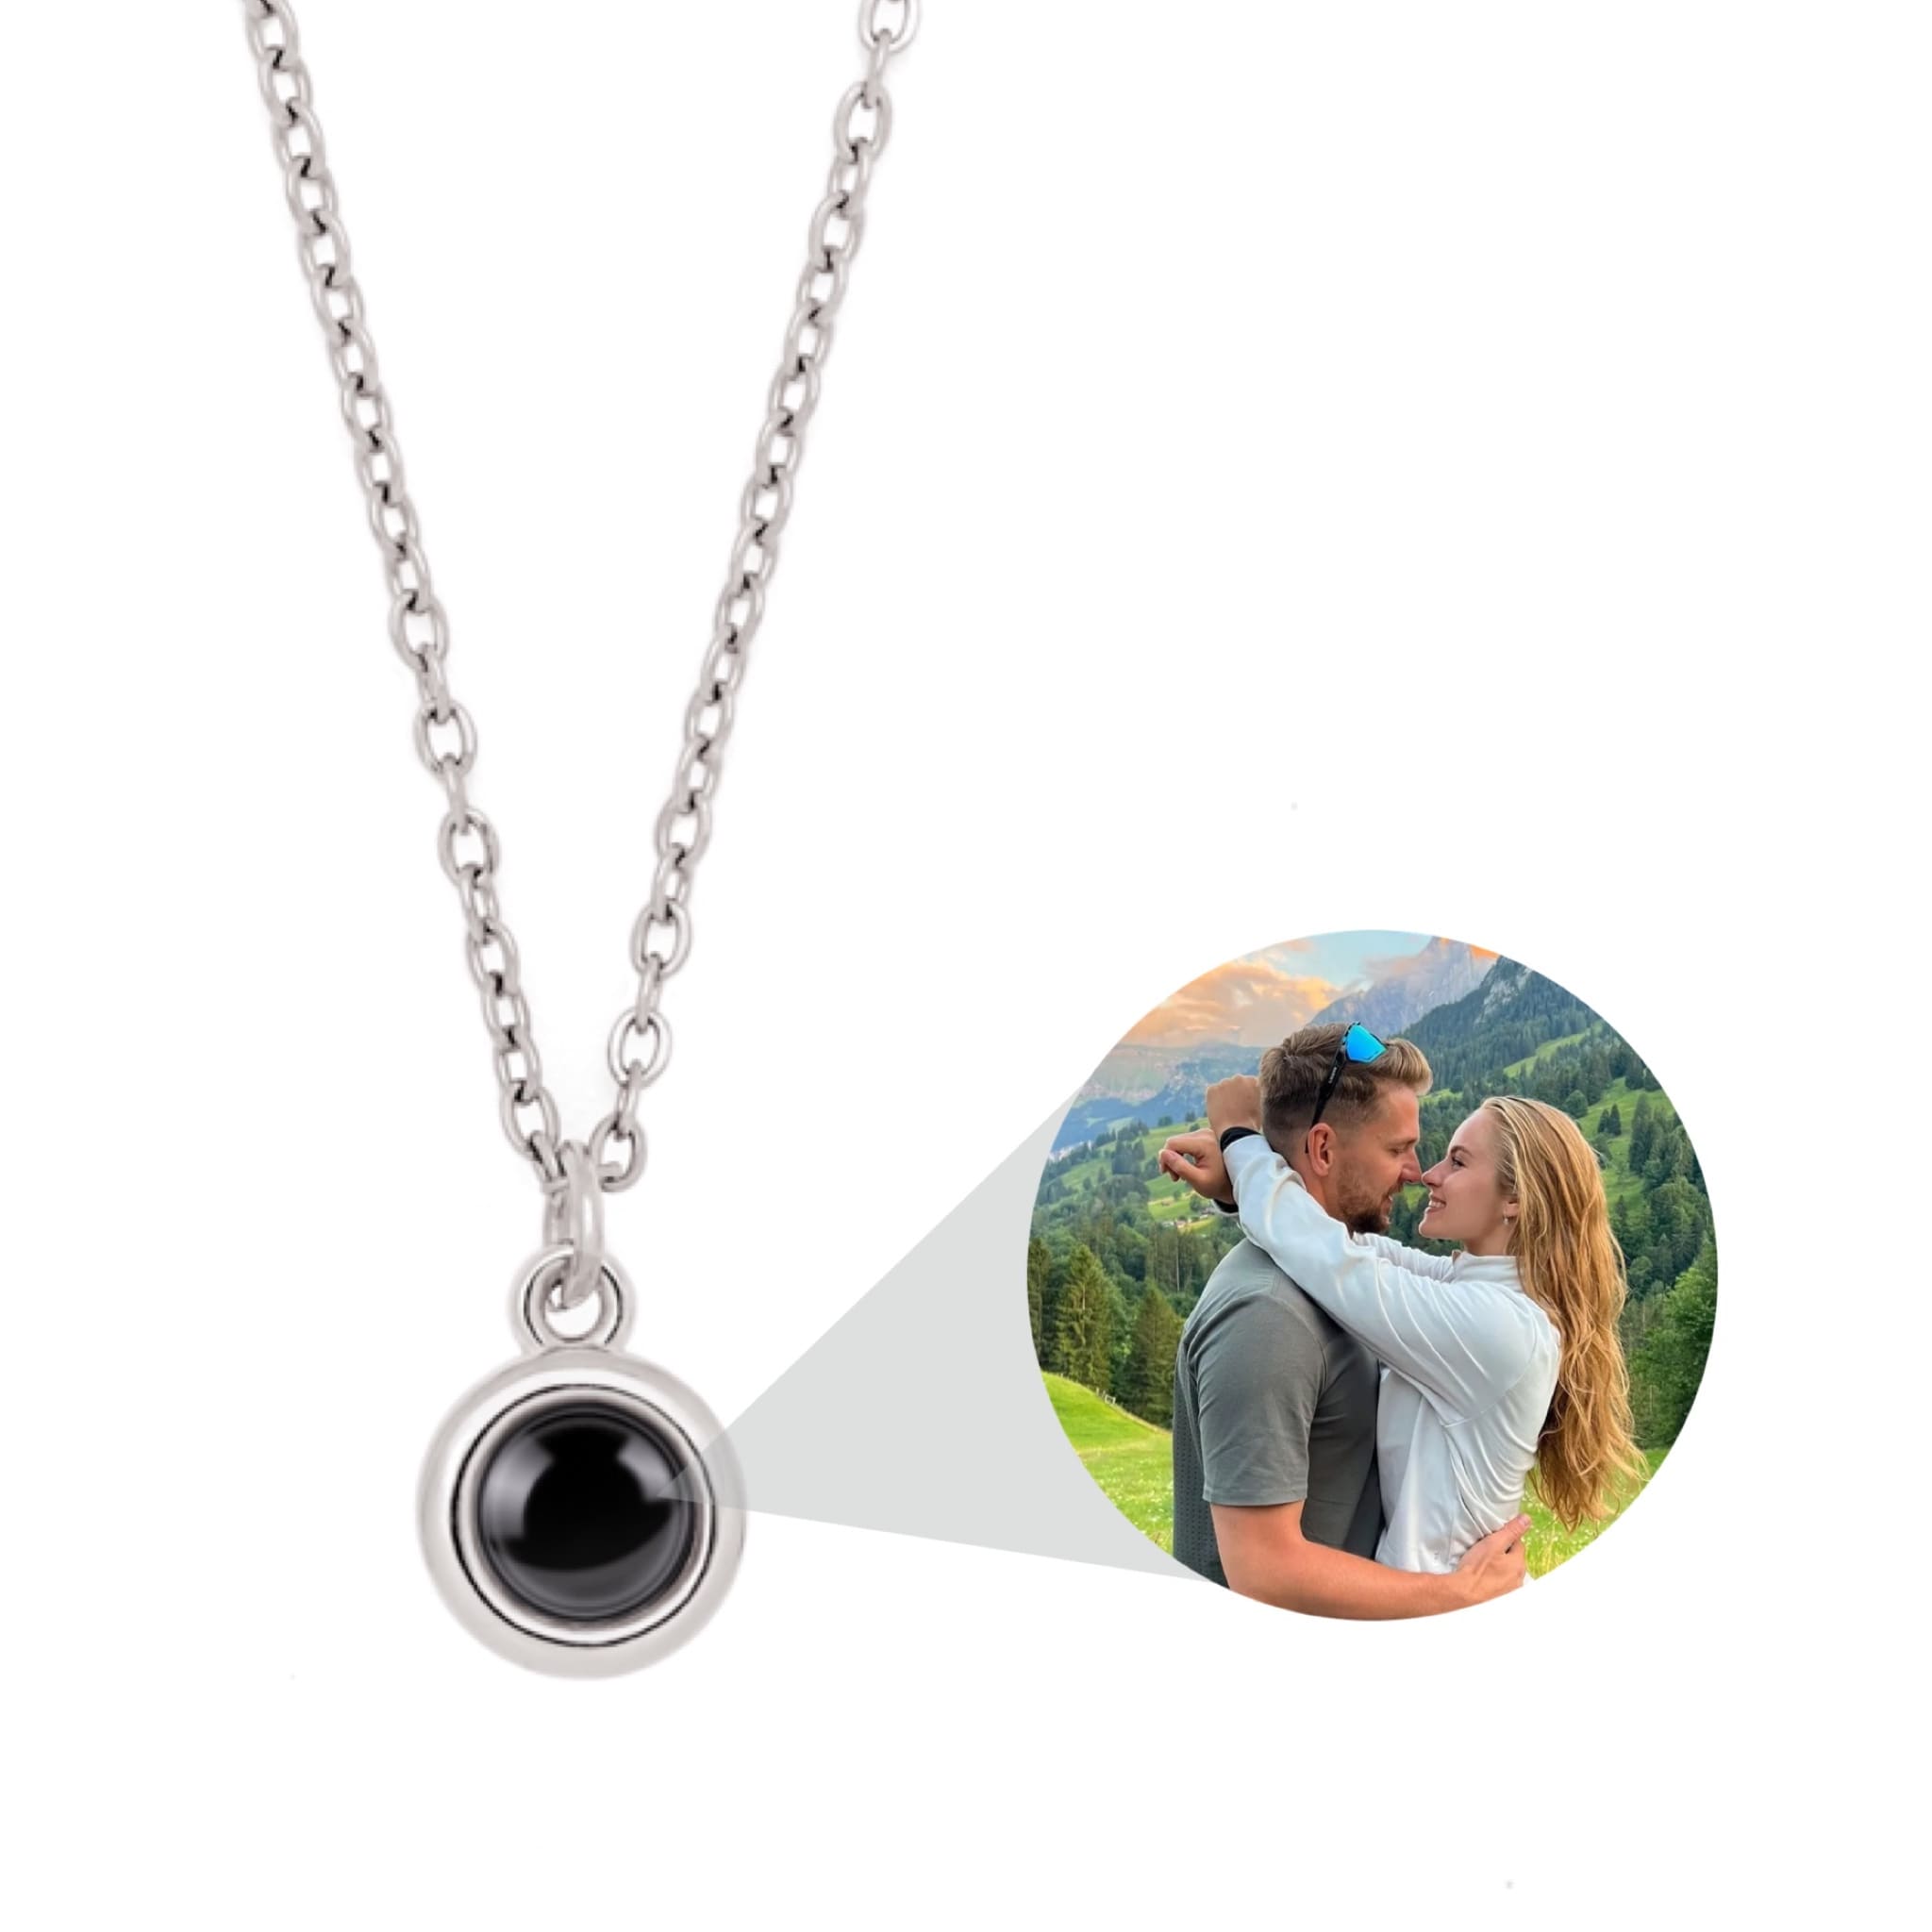 Personalized Sunflower Pendant Photo Projection Necklace with Picture Inside  | Photo necklace, Picture necklace, Engraved necklace